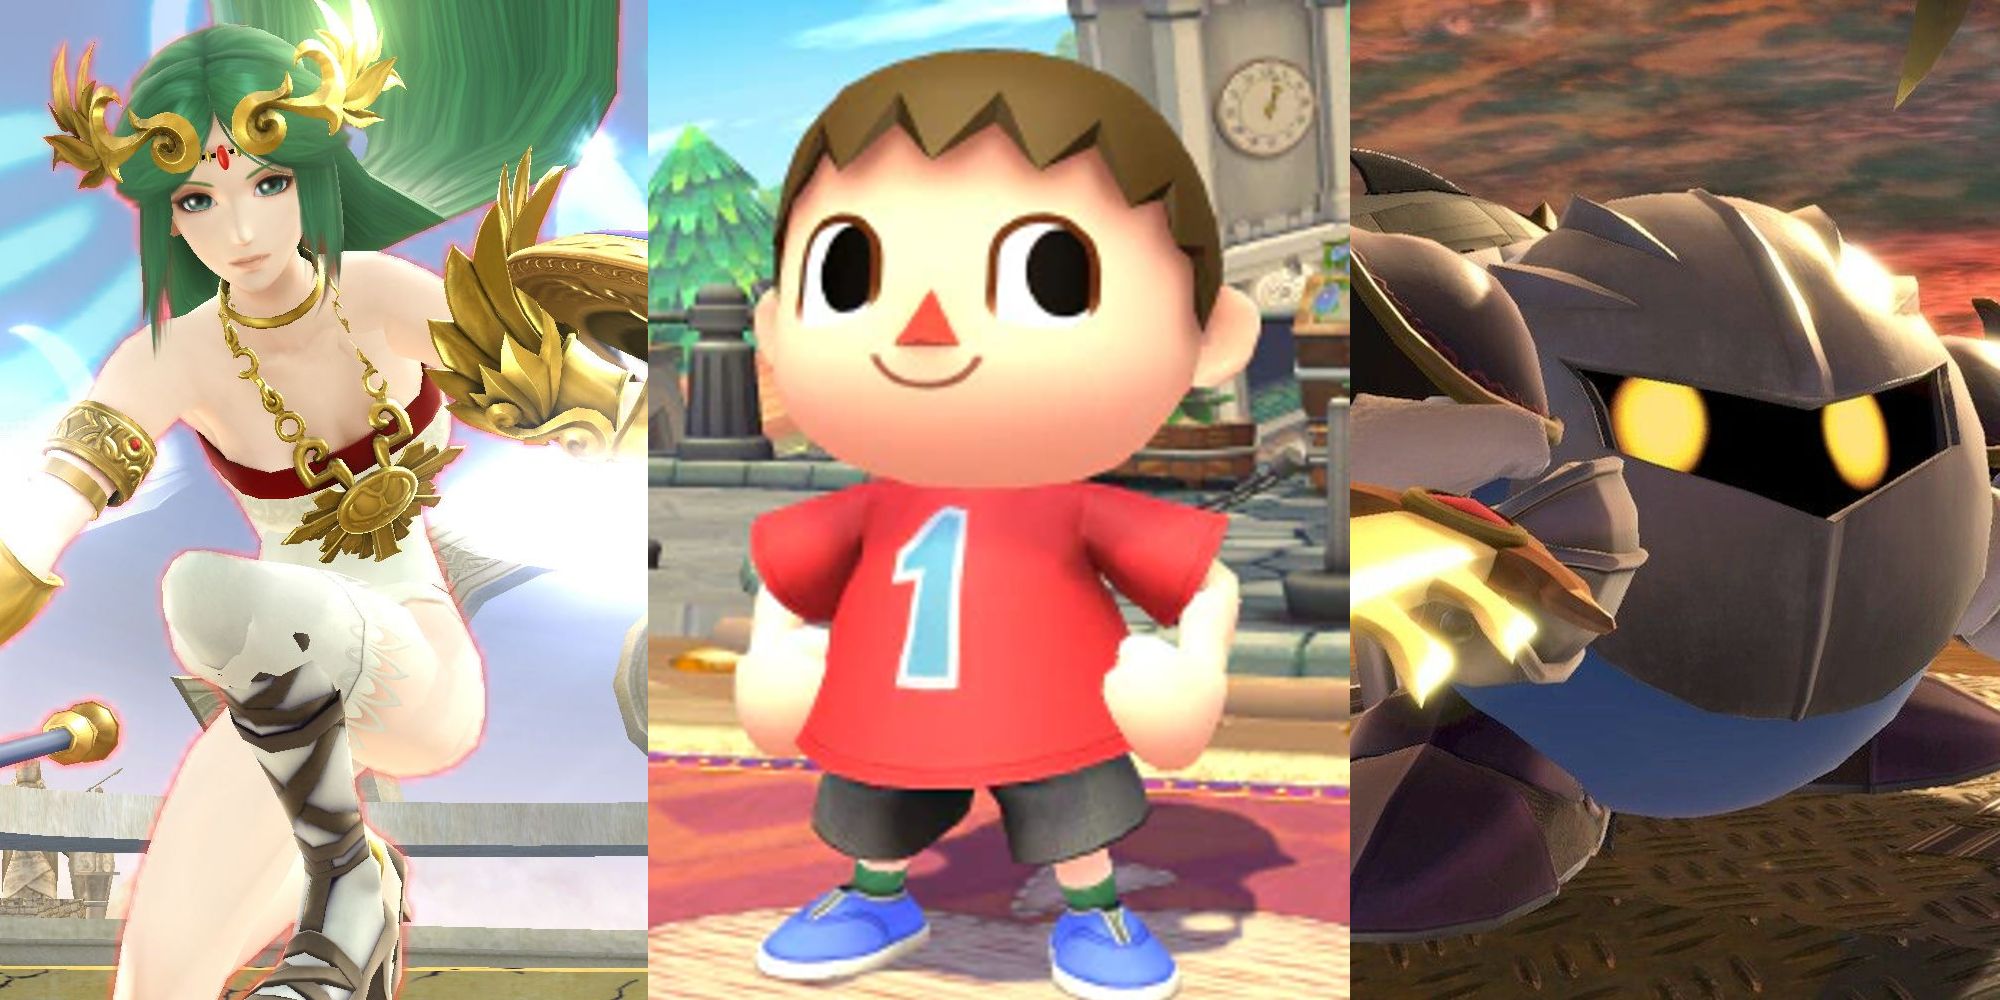 Palutena on the Skyworld stage; Villager on the Town & City stage; Meta Knight on the Halberd stage